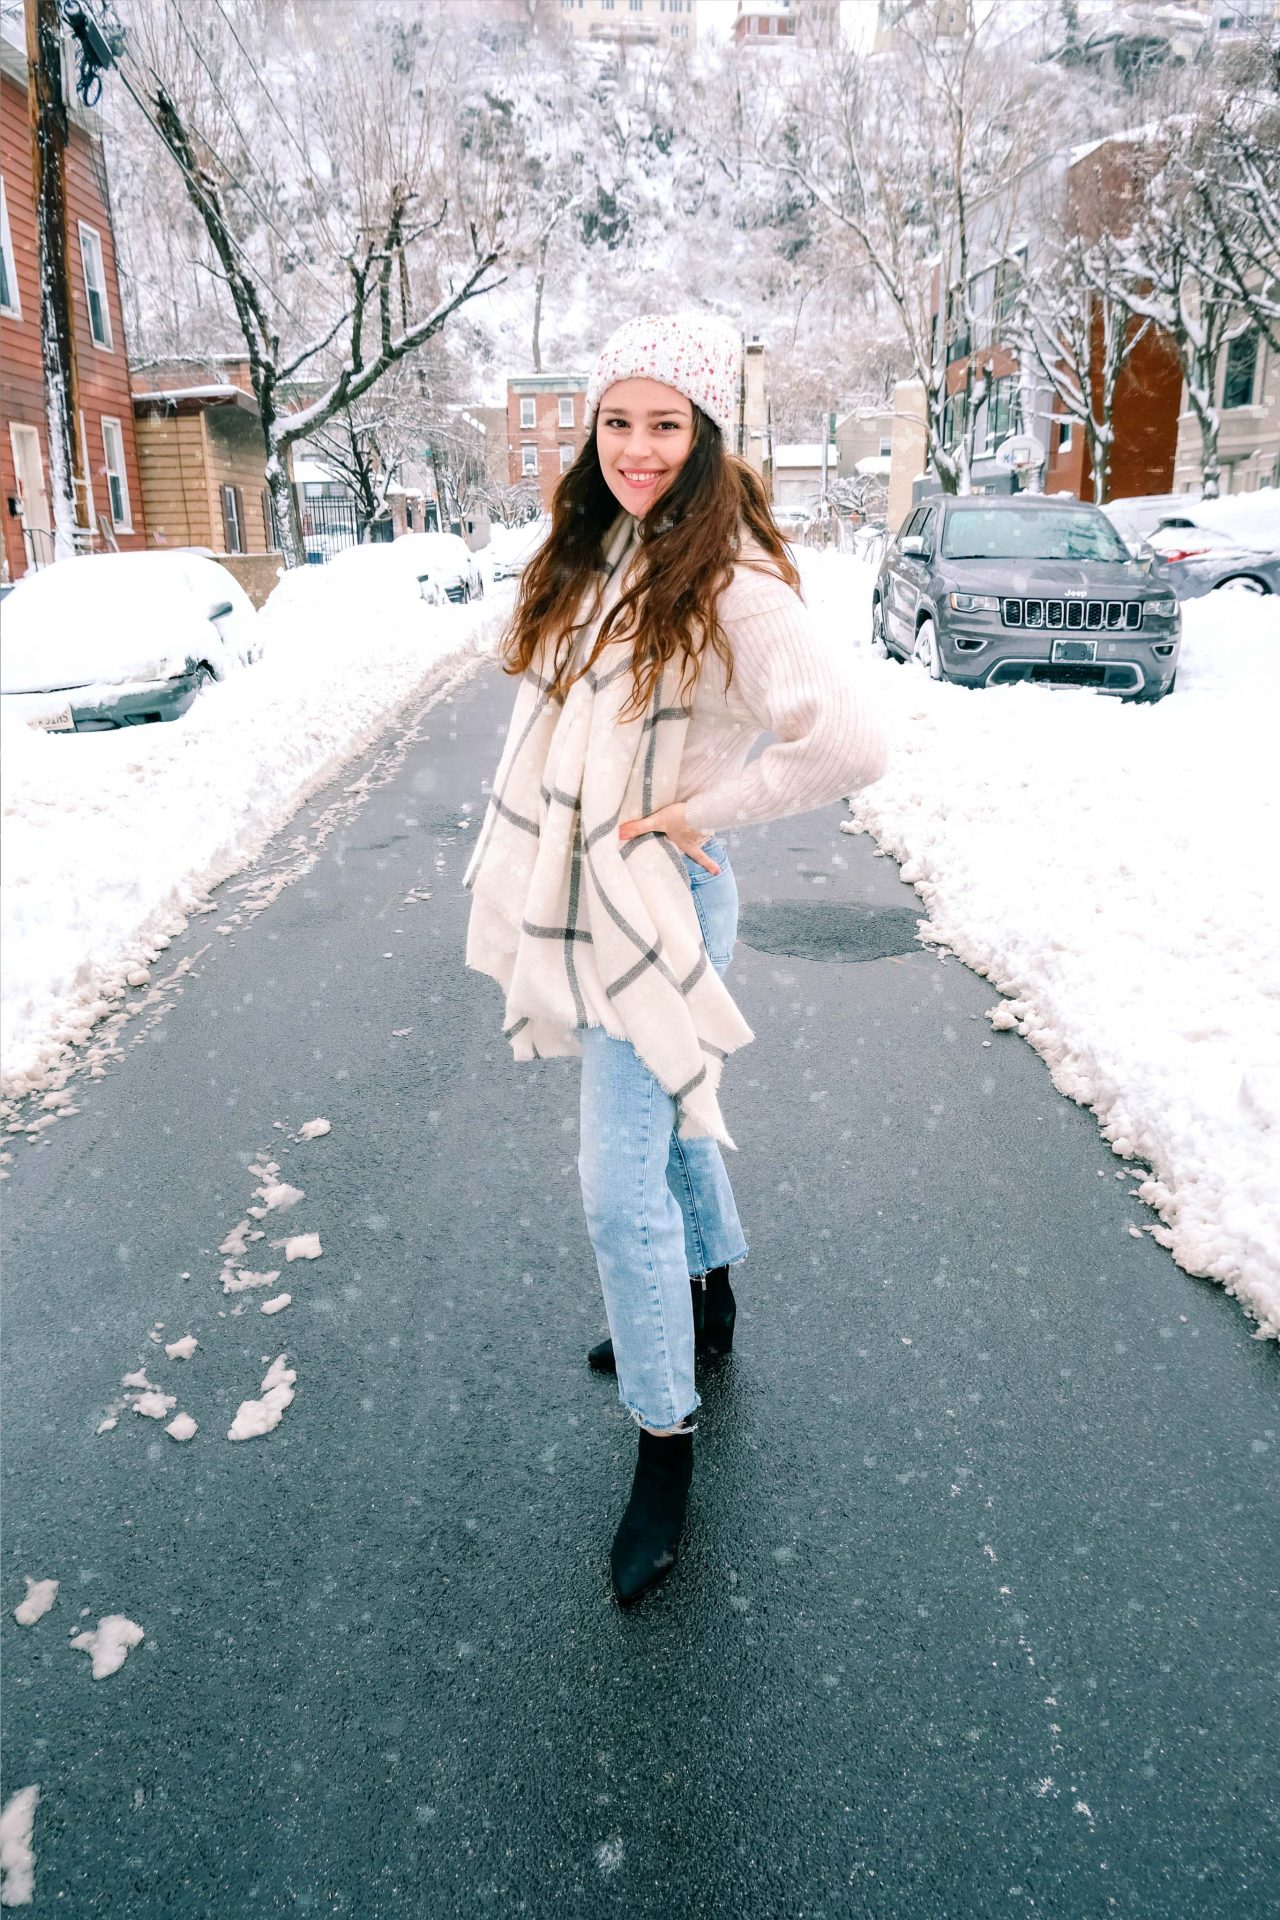 With seemingly never-ending snowstorms and icy sidewalks, fashion